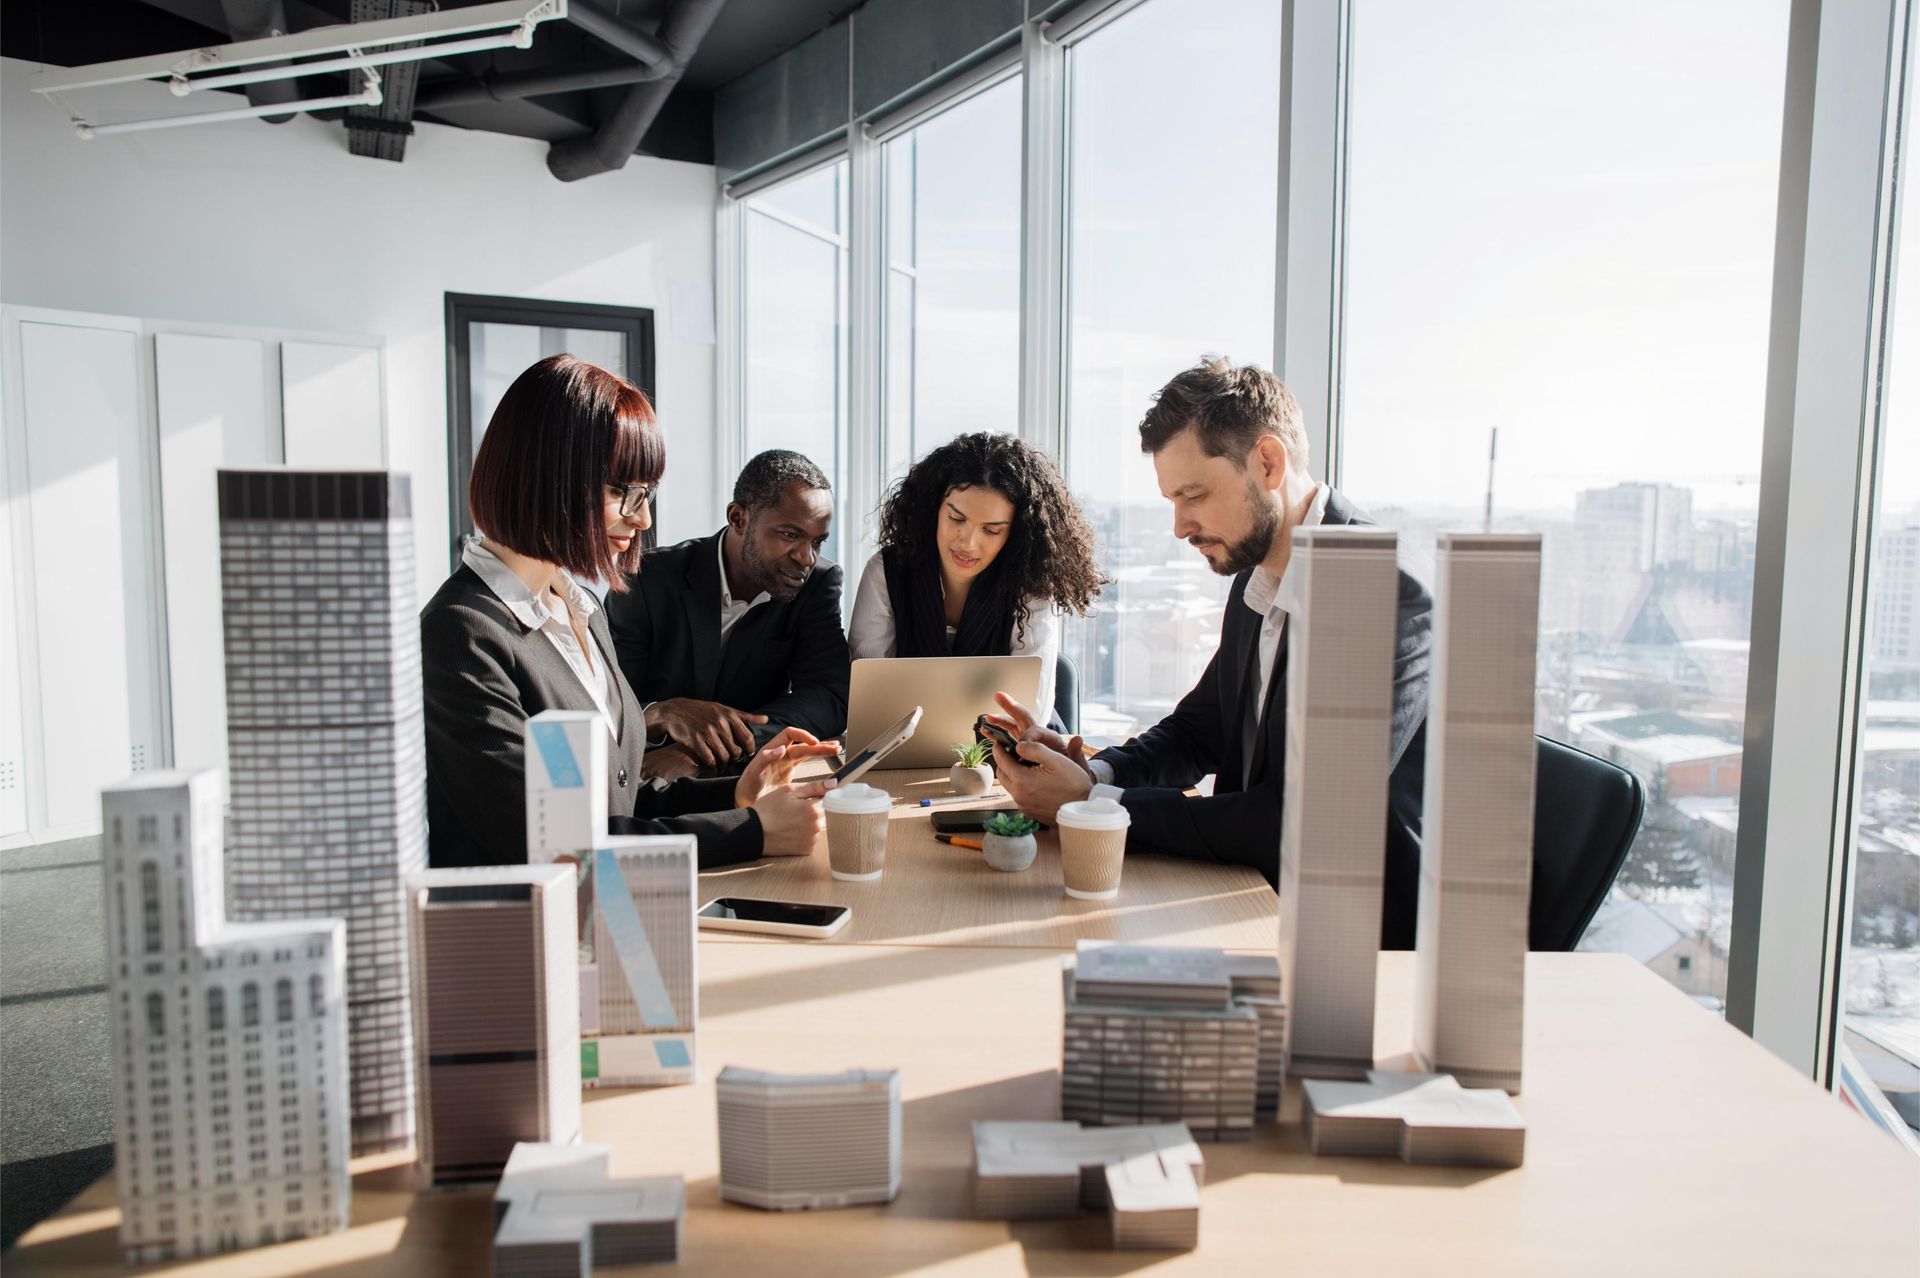 A group of people are sitting around a table with models of buildings on it.